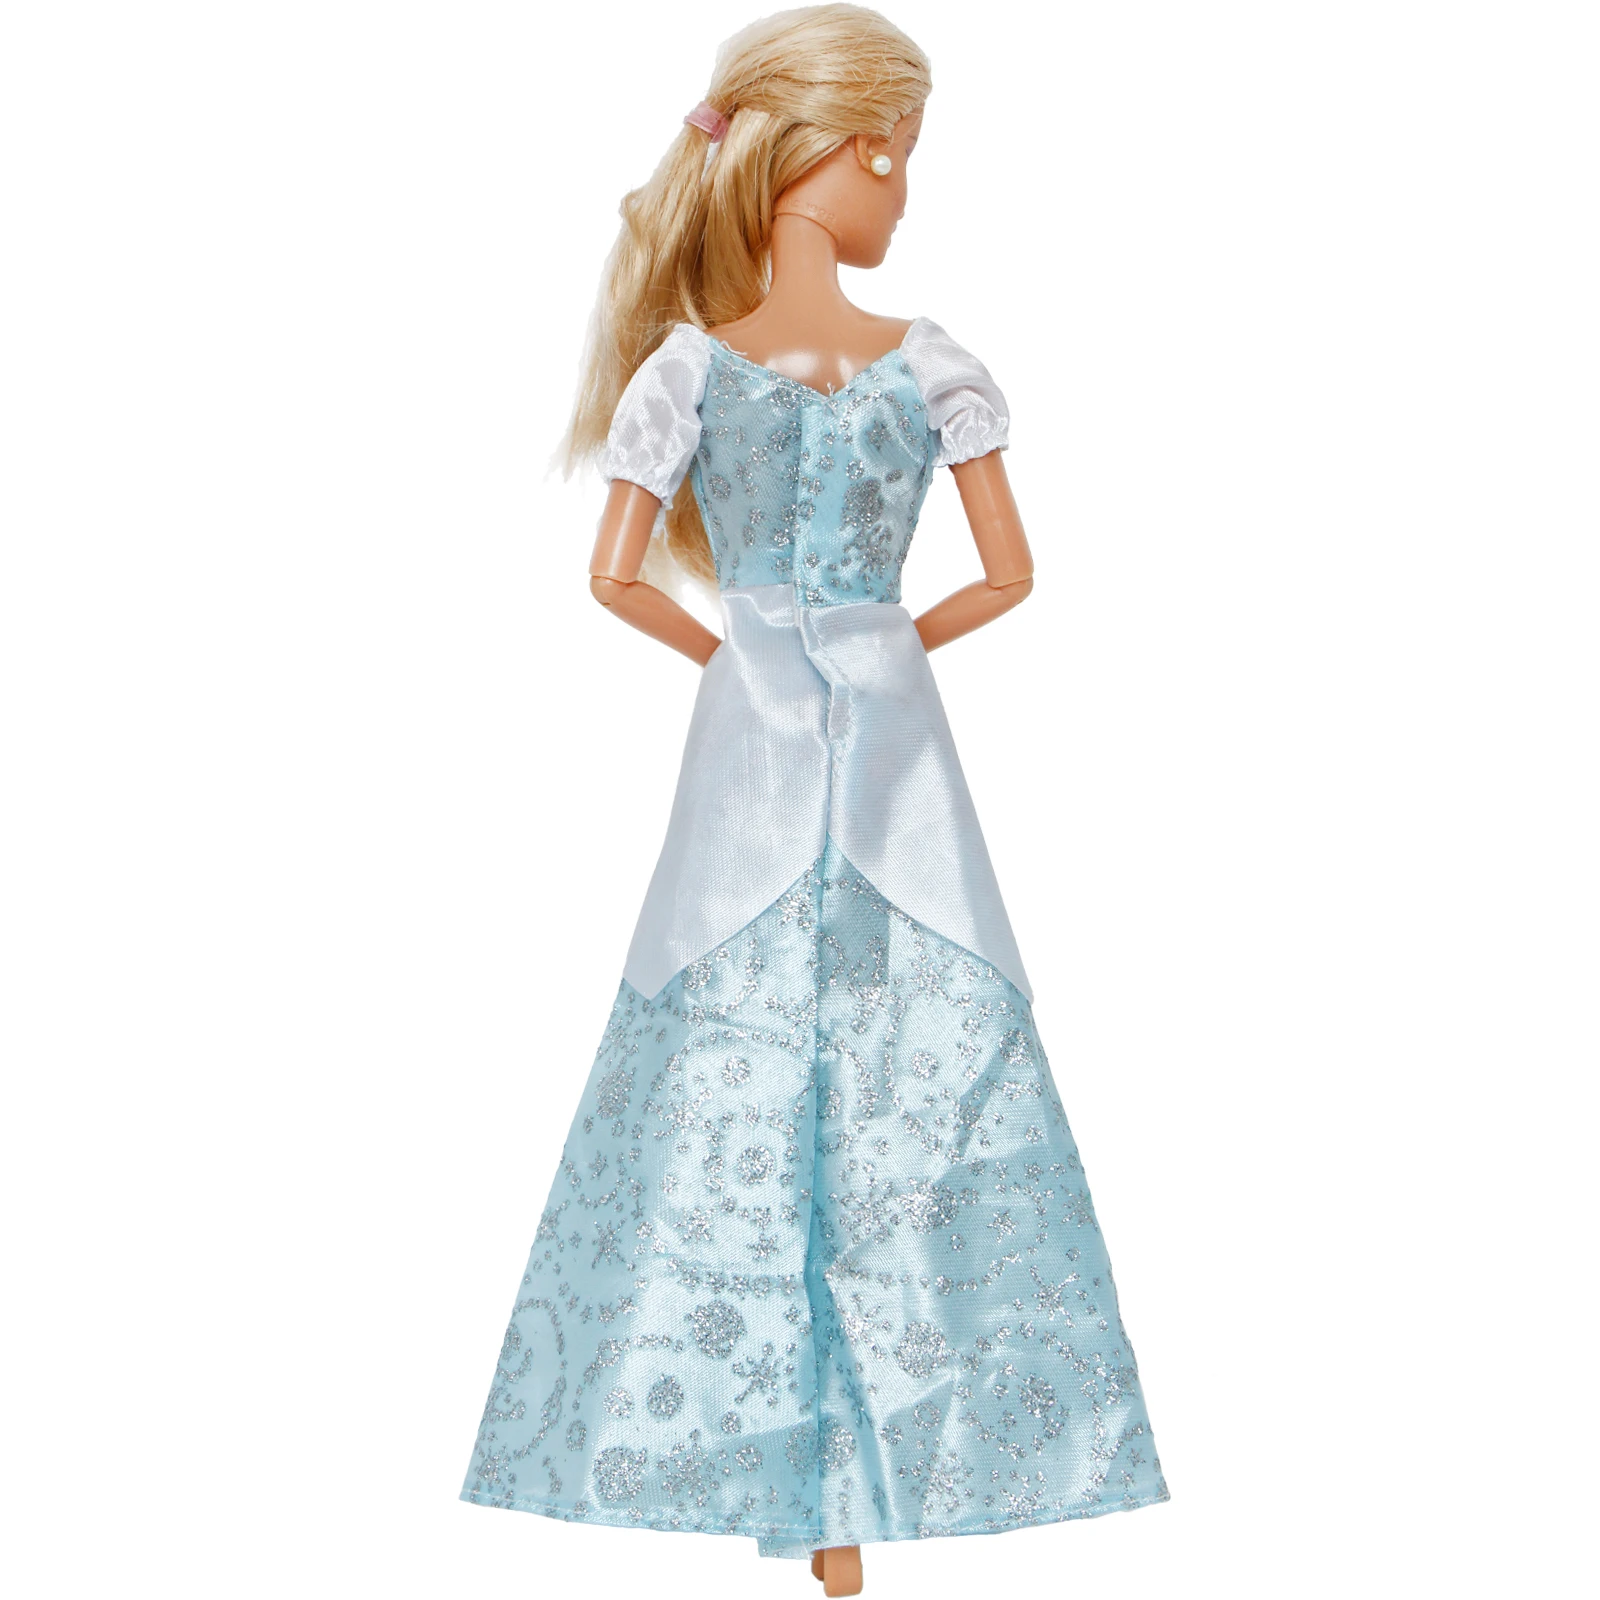 Fashion Fairy Tale Princess Dress Wedding Gown Shiny Party Outfit Clothes for Barbie Doll 12'' Pretend Play Kid Dollhouse Toys |